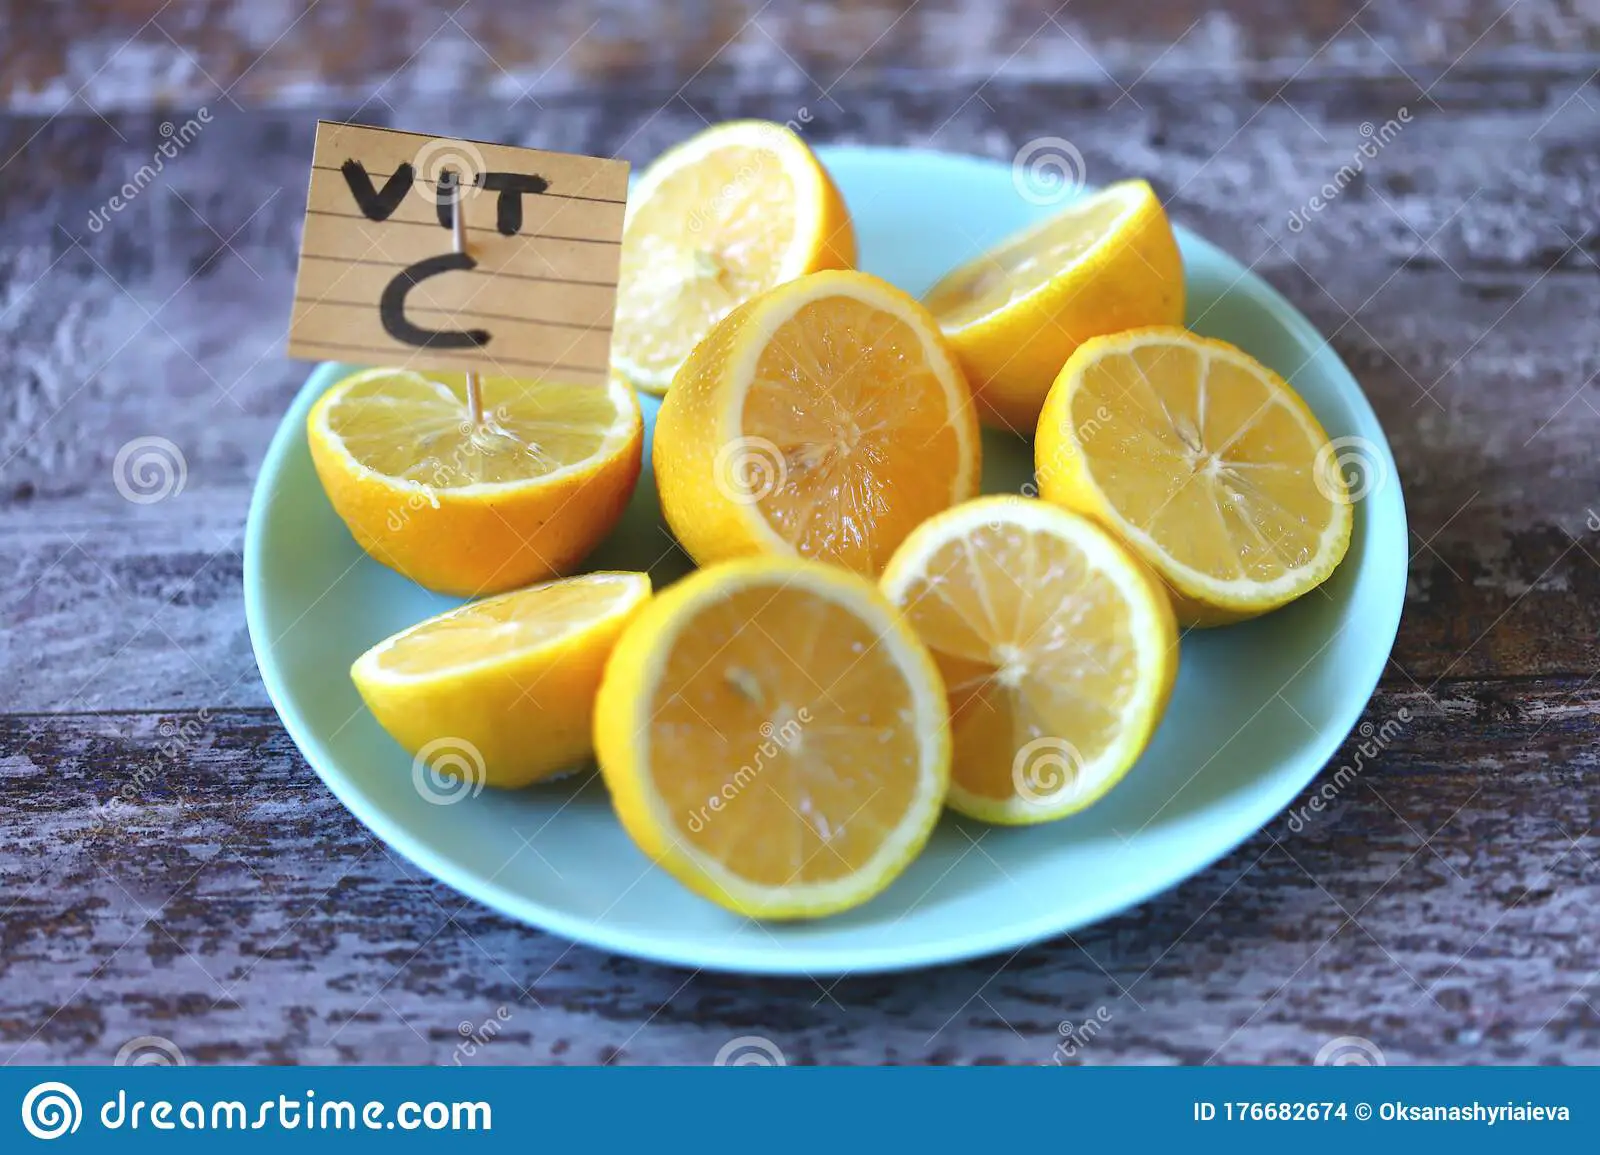 Lemons As A Source Of Vitamin C Concept. Plate With Lemons ...